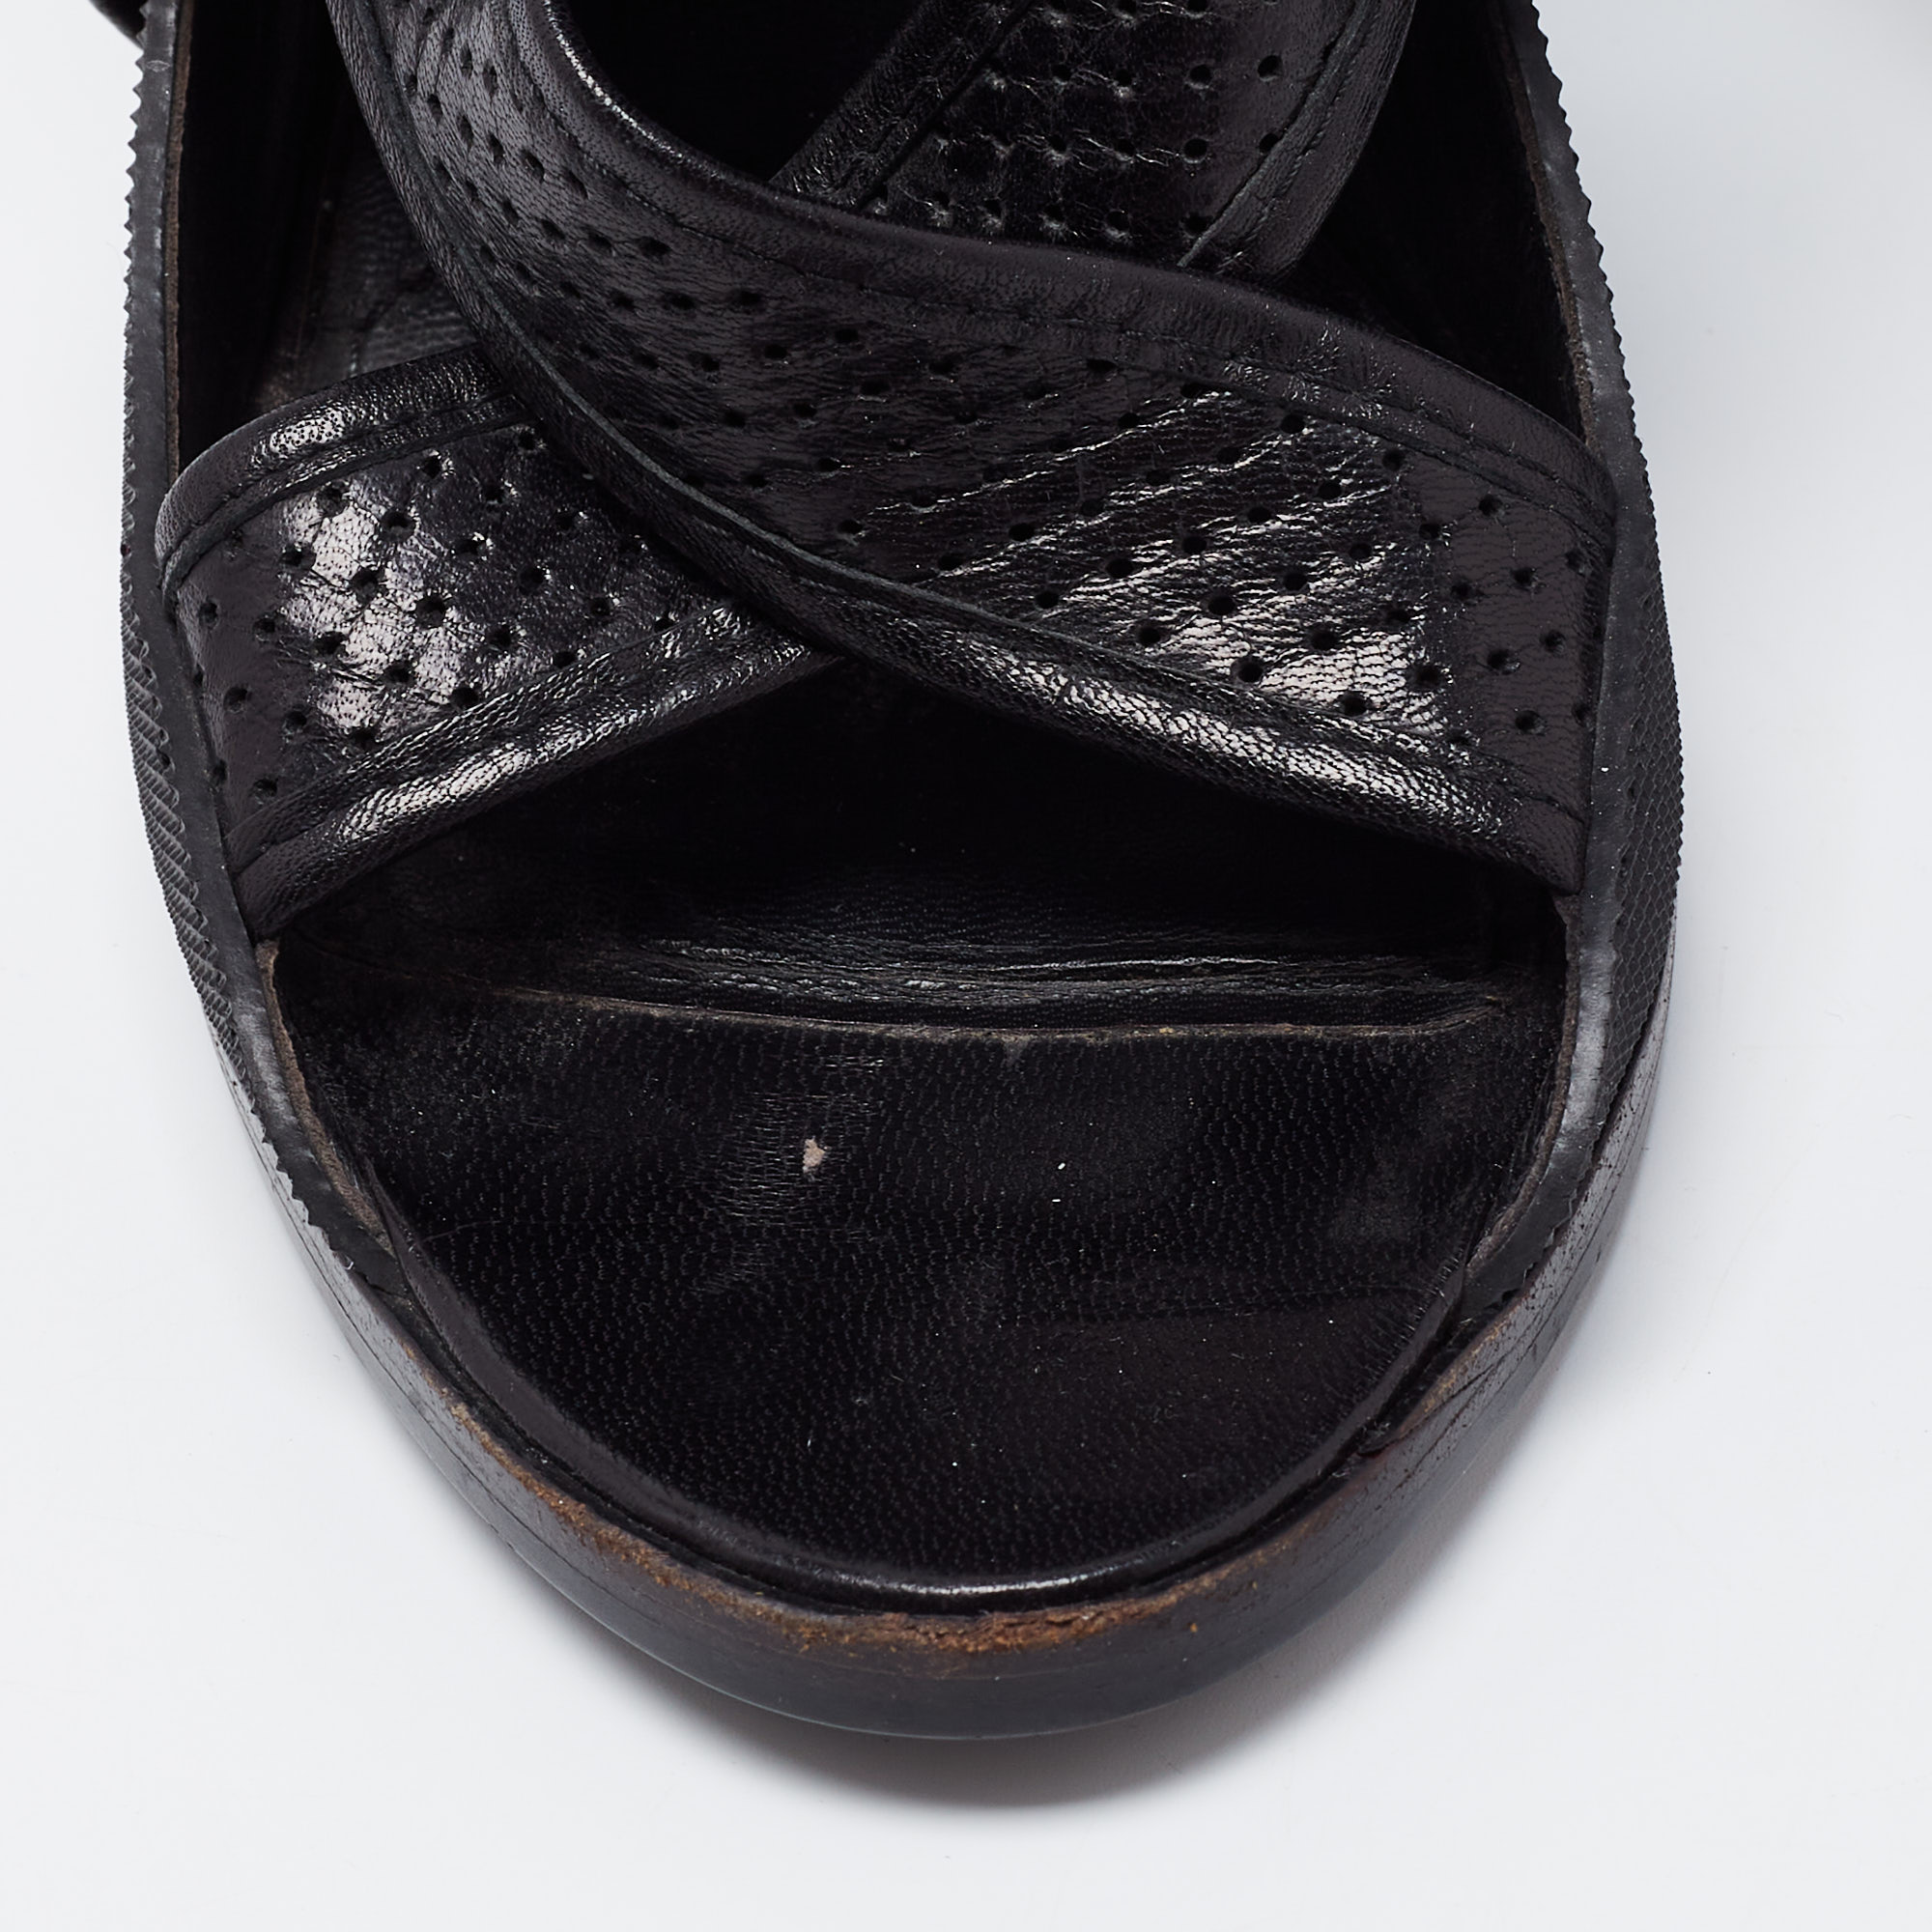 Givenchy Black Leather Ankle-Strap Sandals Size 38